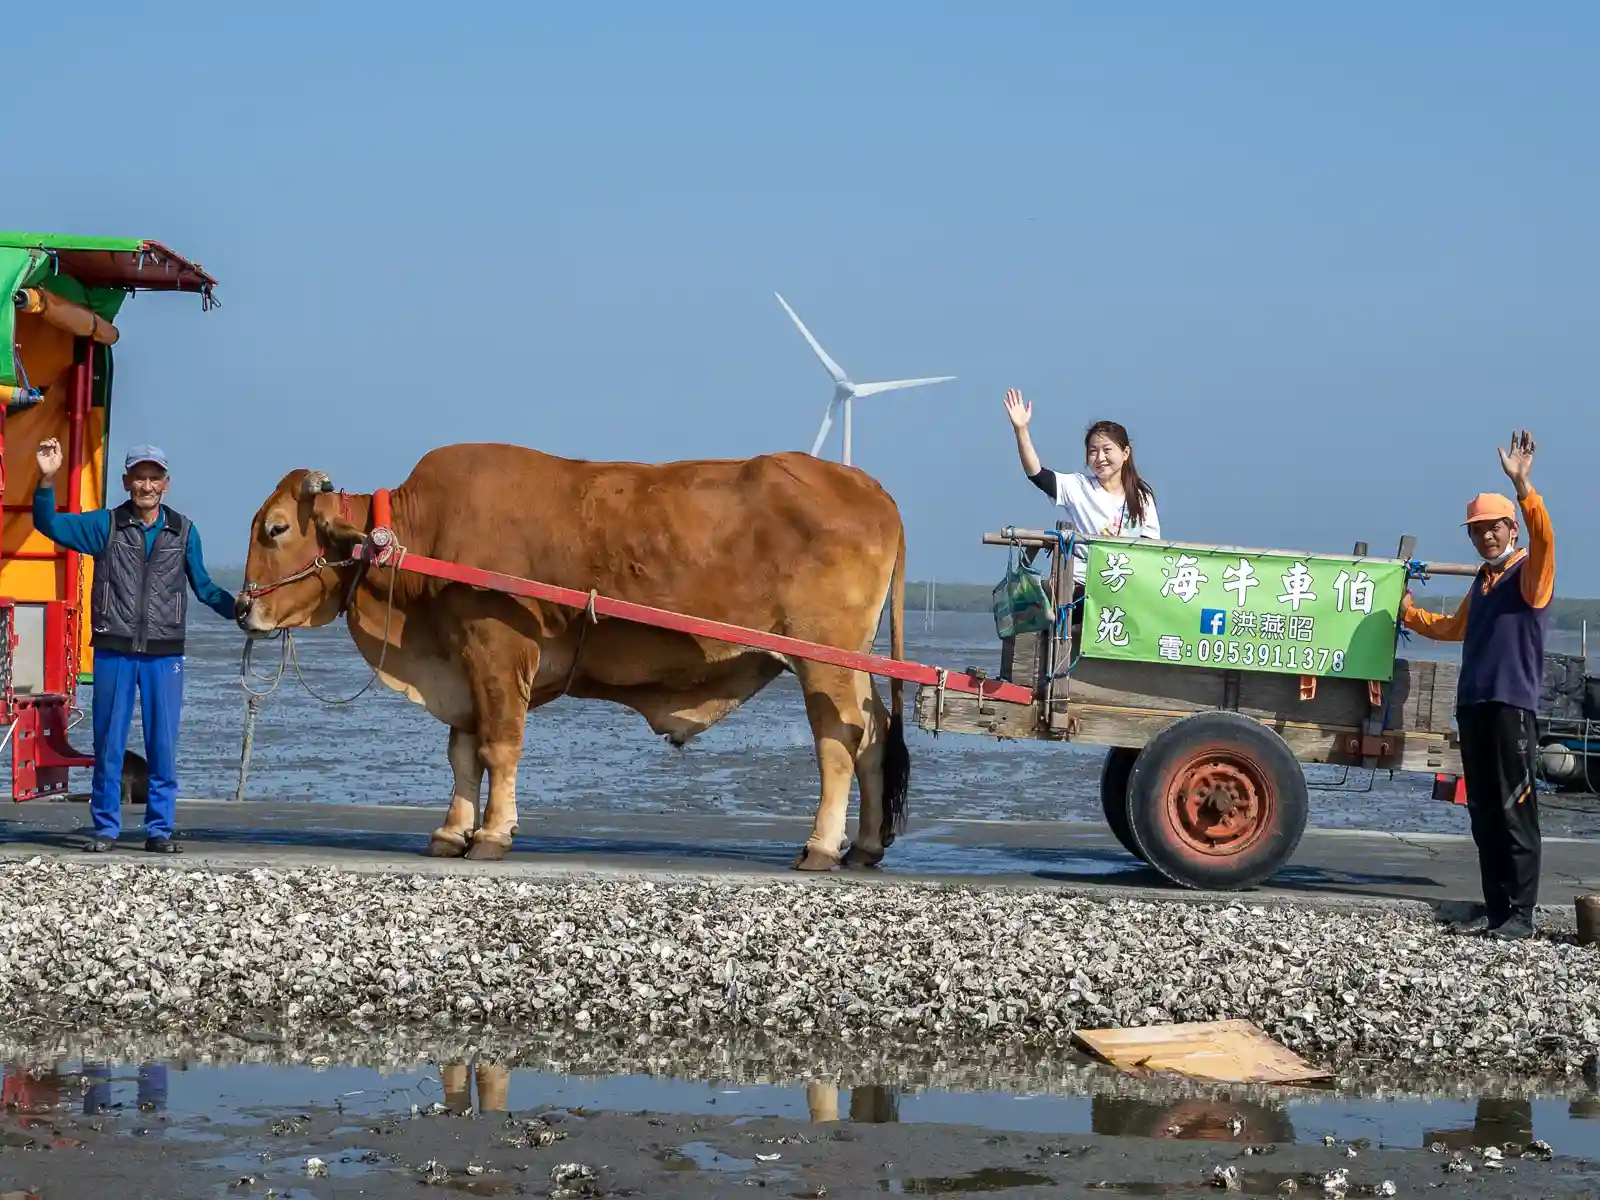 Oyster farmers operate a tour featuring a water buffalo-drawn cart